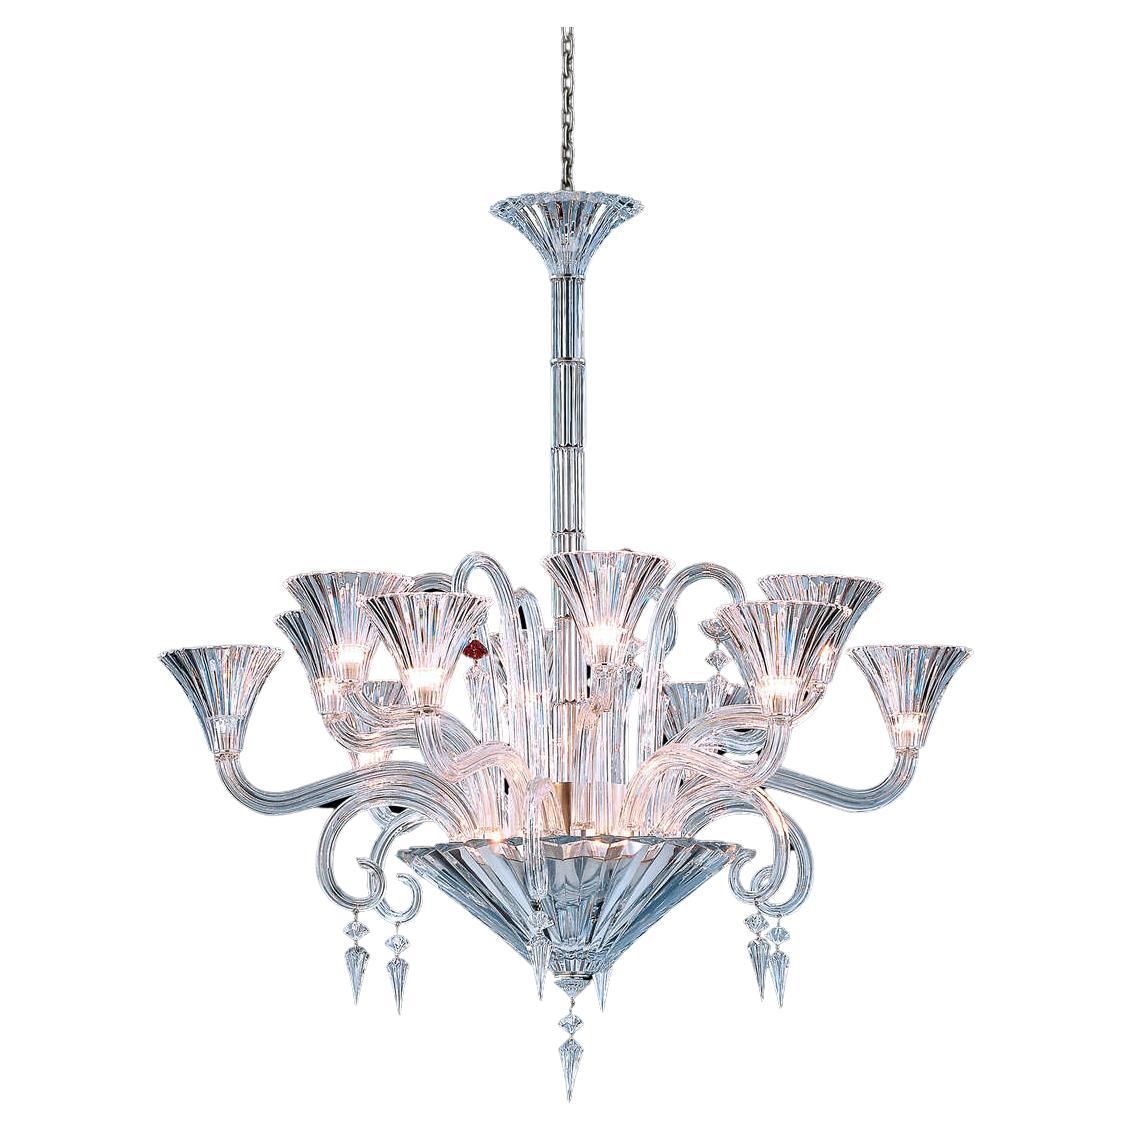 Large Exquisite French Baccarat Crystal Mille Nuits Twelve Light Chandelier